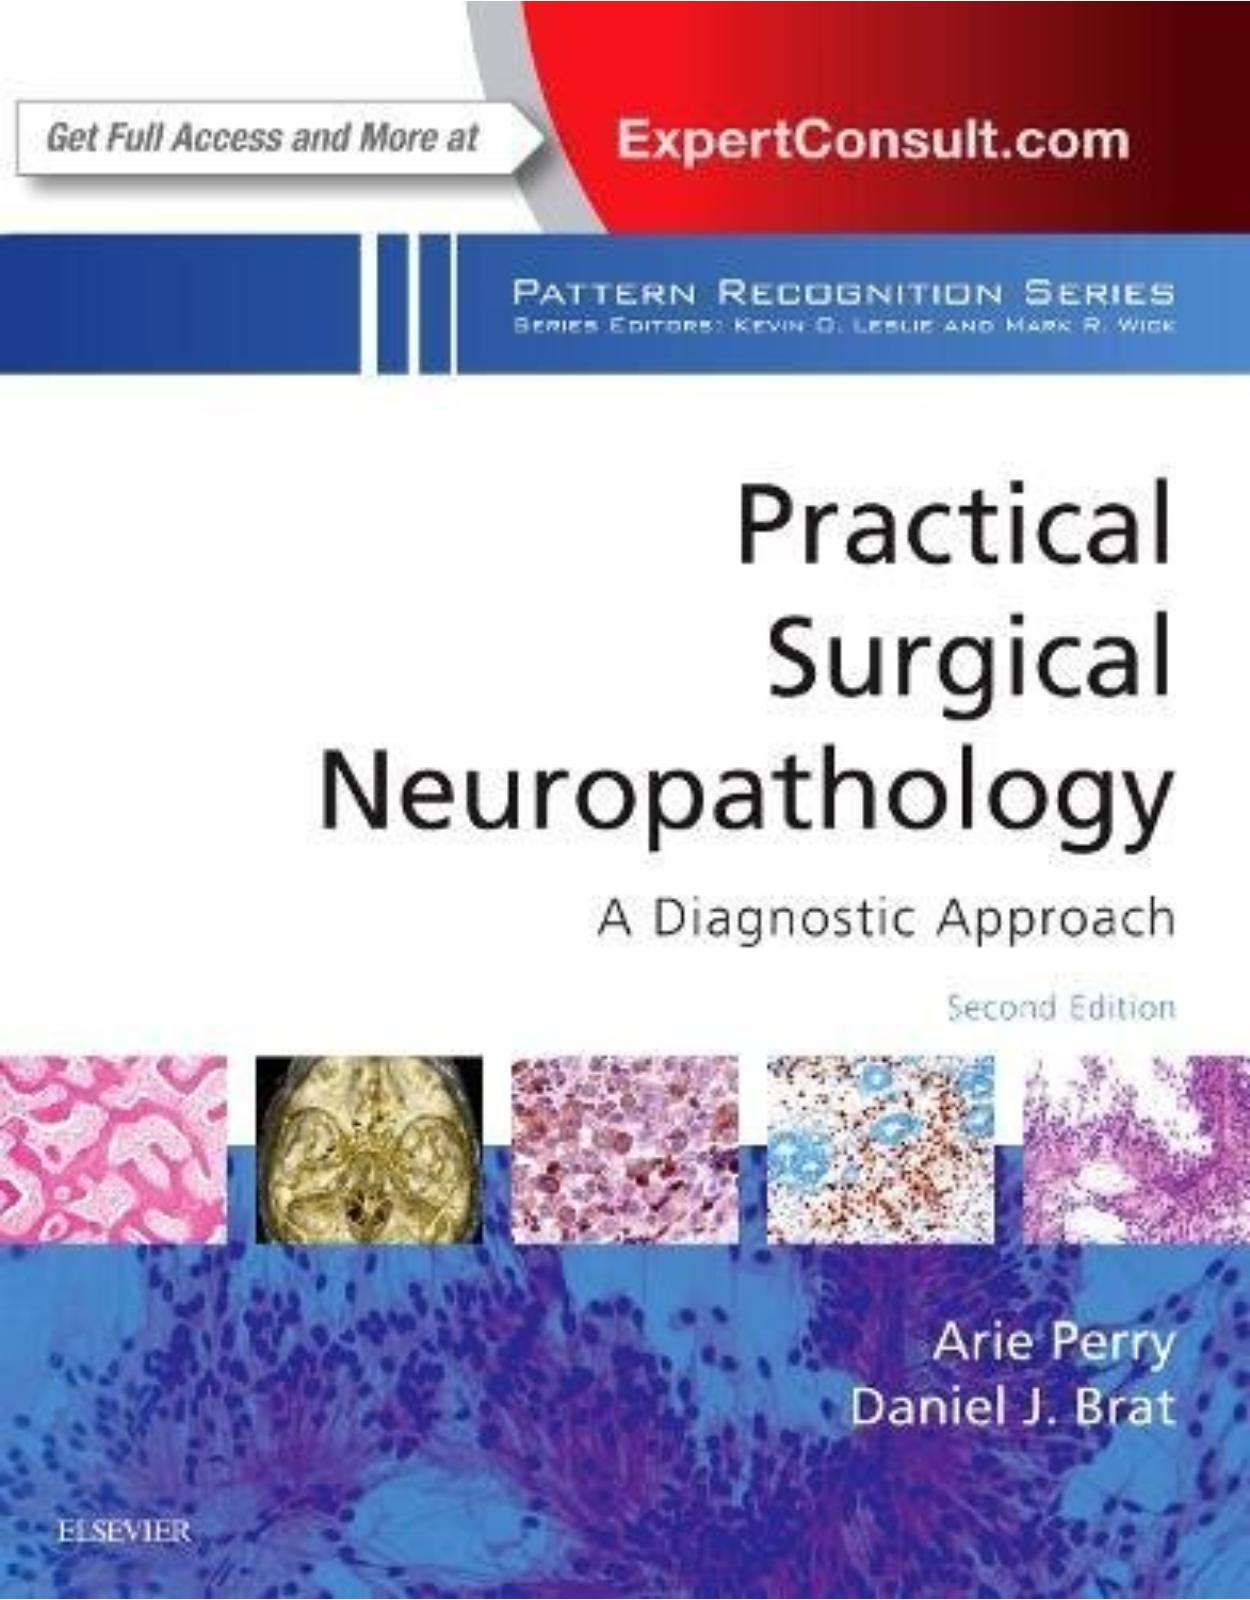 Practical Surgical Neuropathology: A Diagnostic Approach: A Volume in the Pattern Recognition Series, 2e